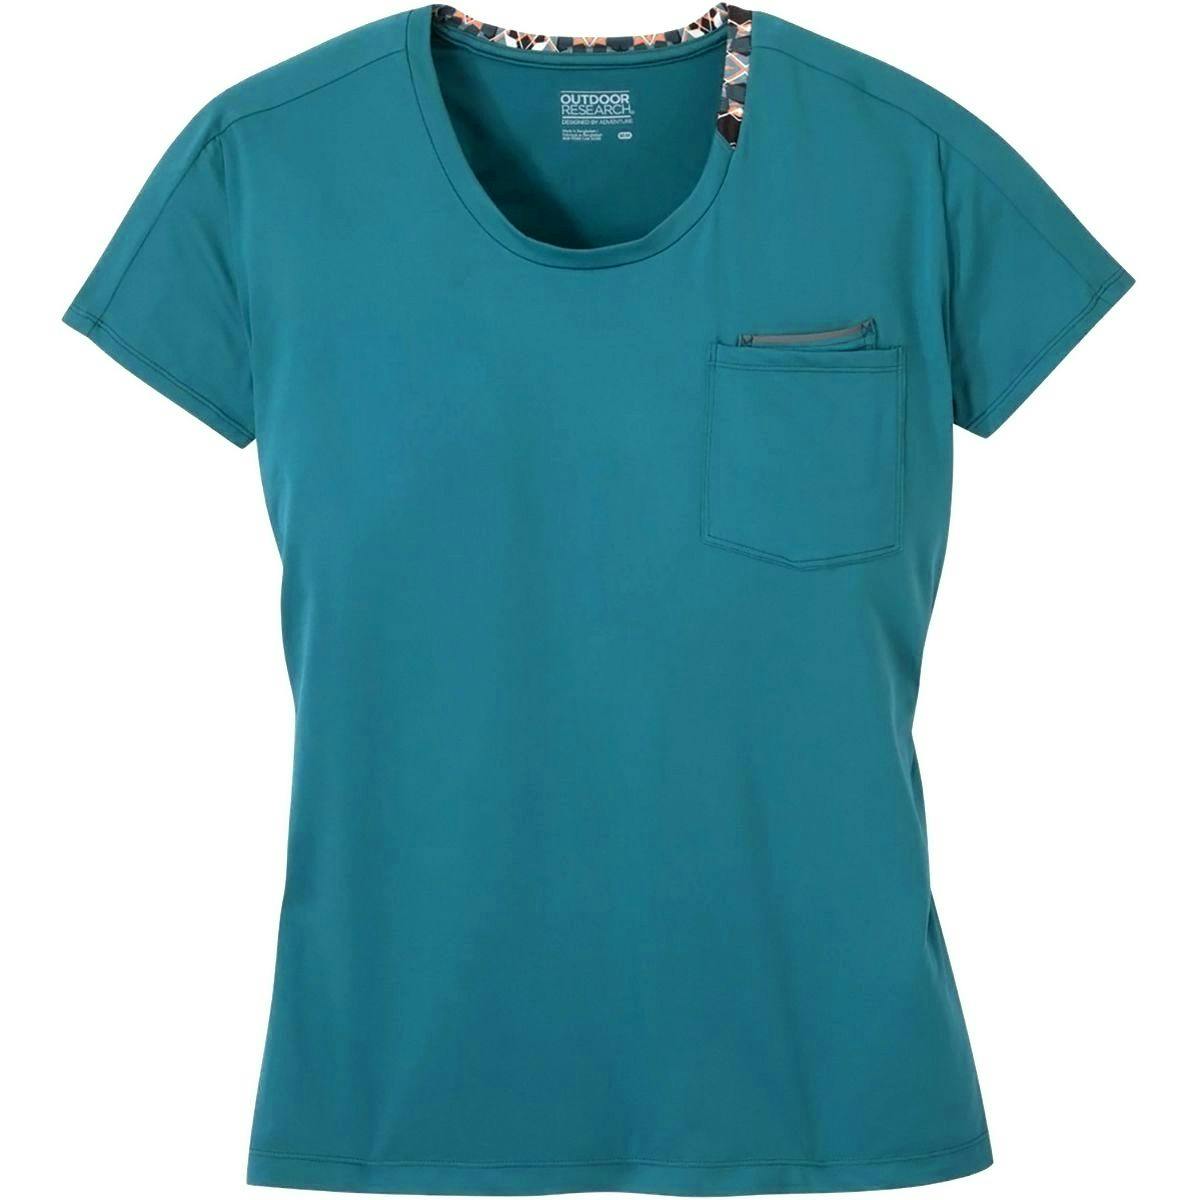 Outdoor Research Women's Chain Reaction Tee